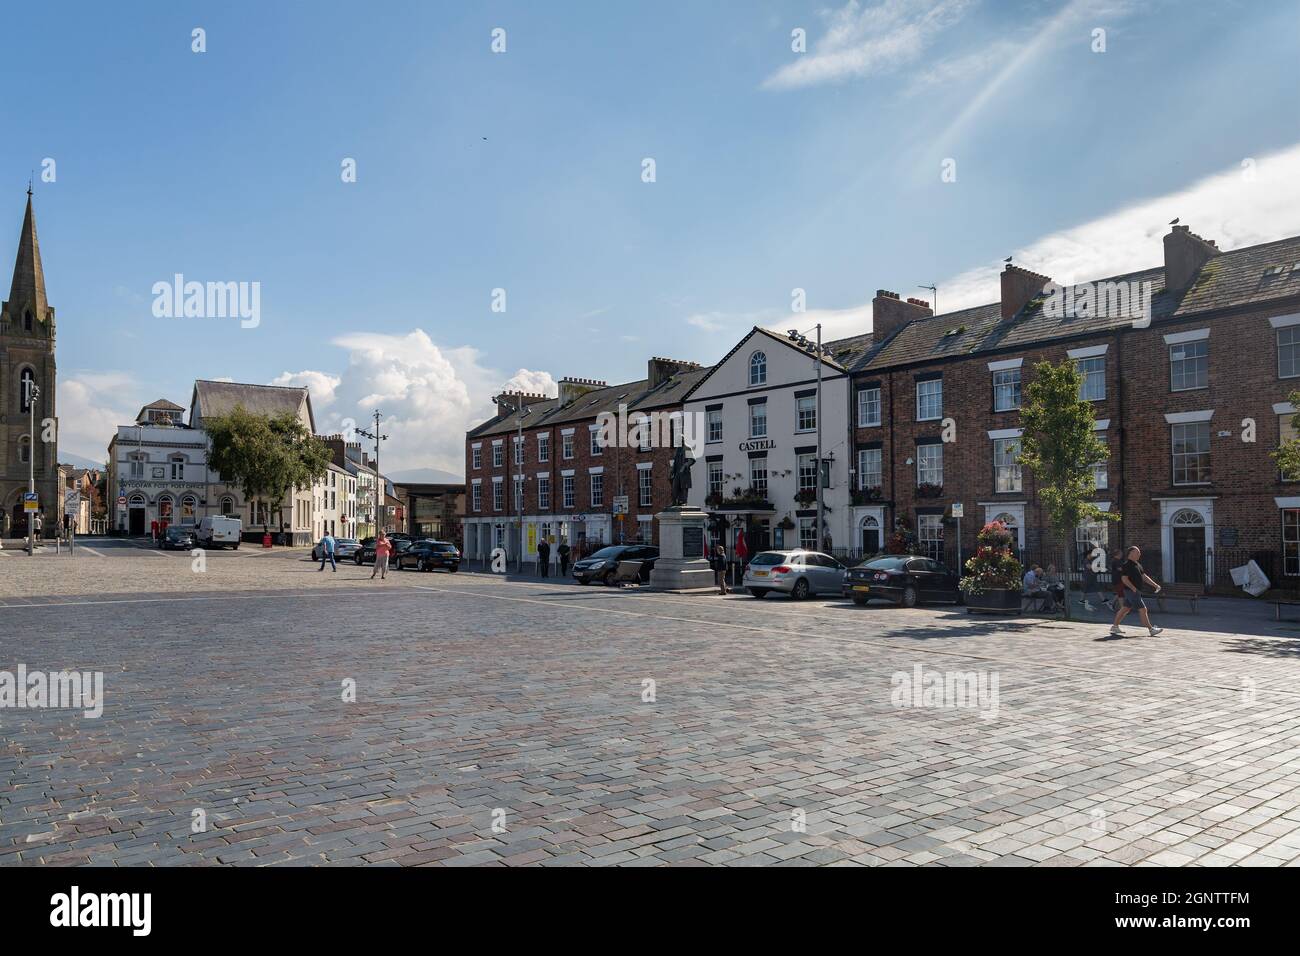 Caernarfon, Wales: Castle Square (Y Maes), large open pedestrianised area in the town centre. Stock Photo